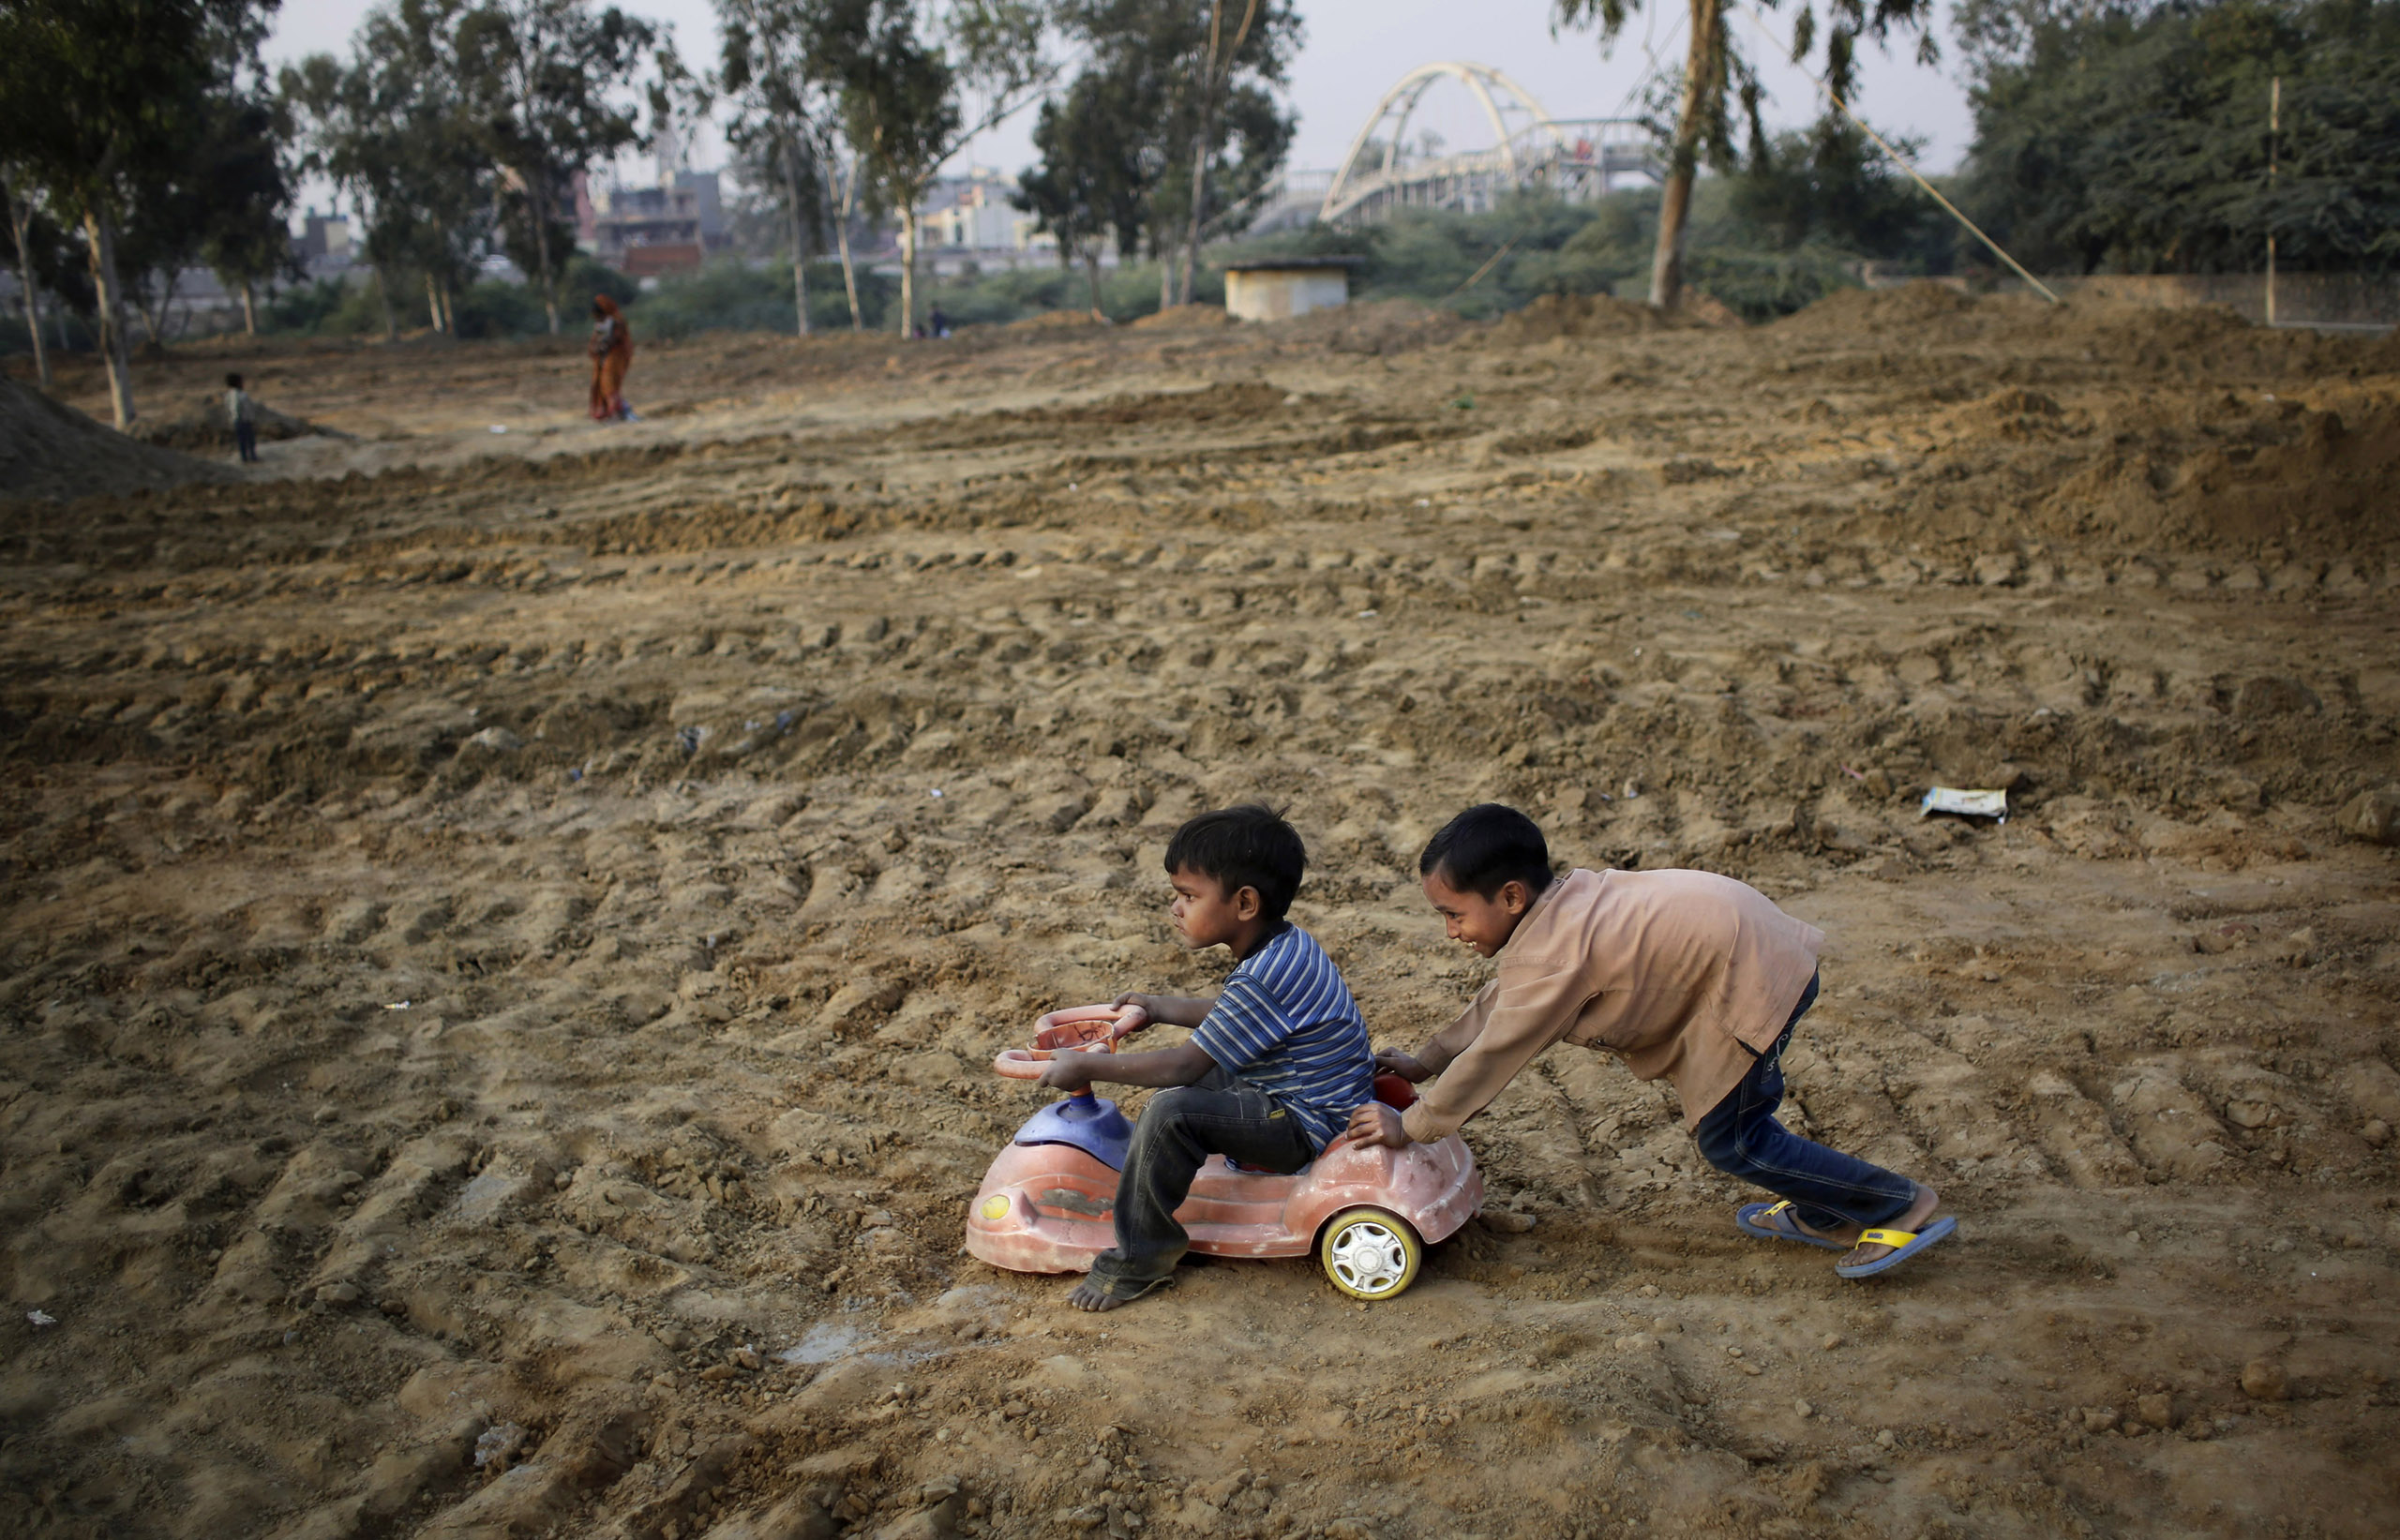 Indian boys play with a toy car salvaged from a nearby landfill in a field being prepared for a metro station near a slum in New Delhi, India on Nov. 13, 2014.